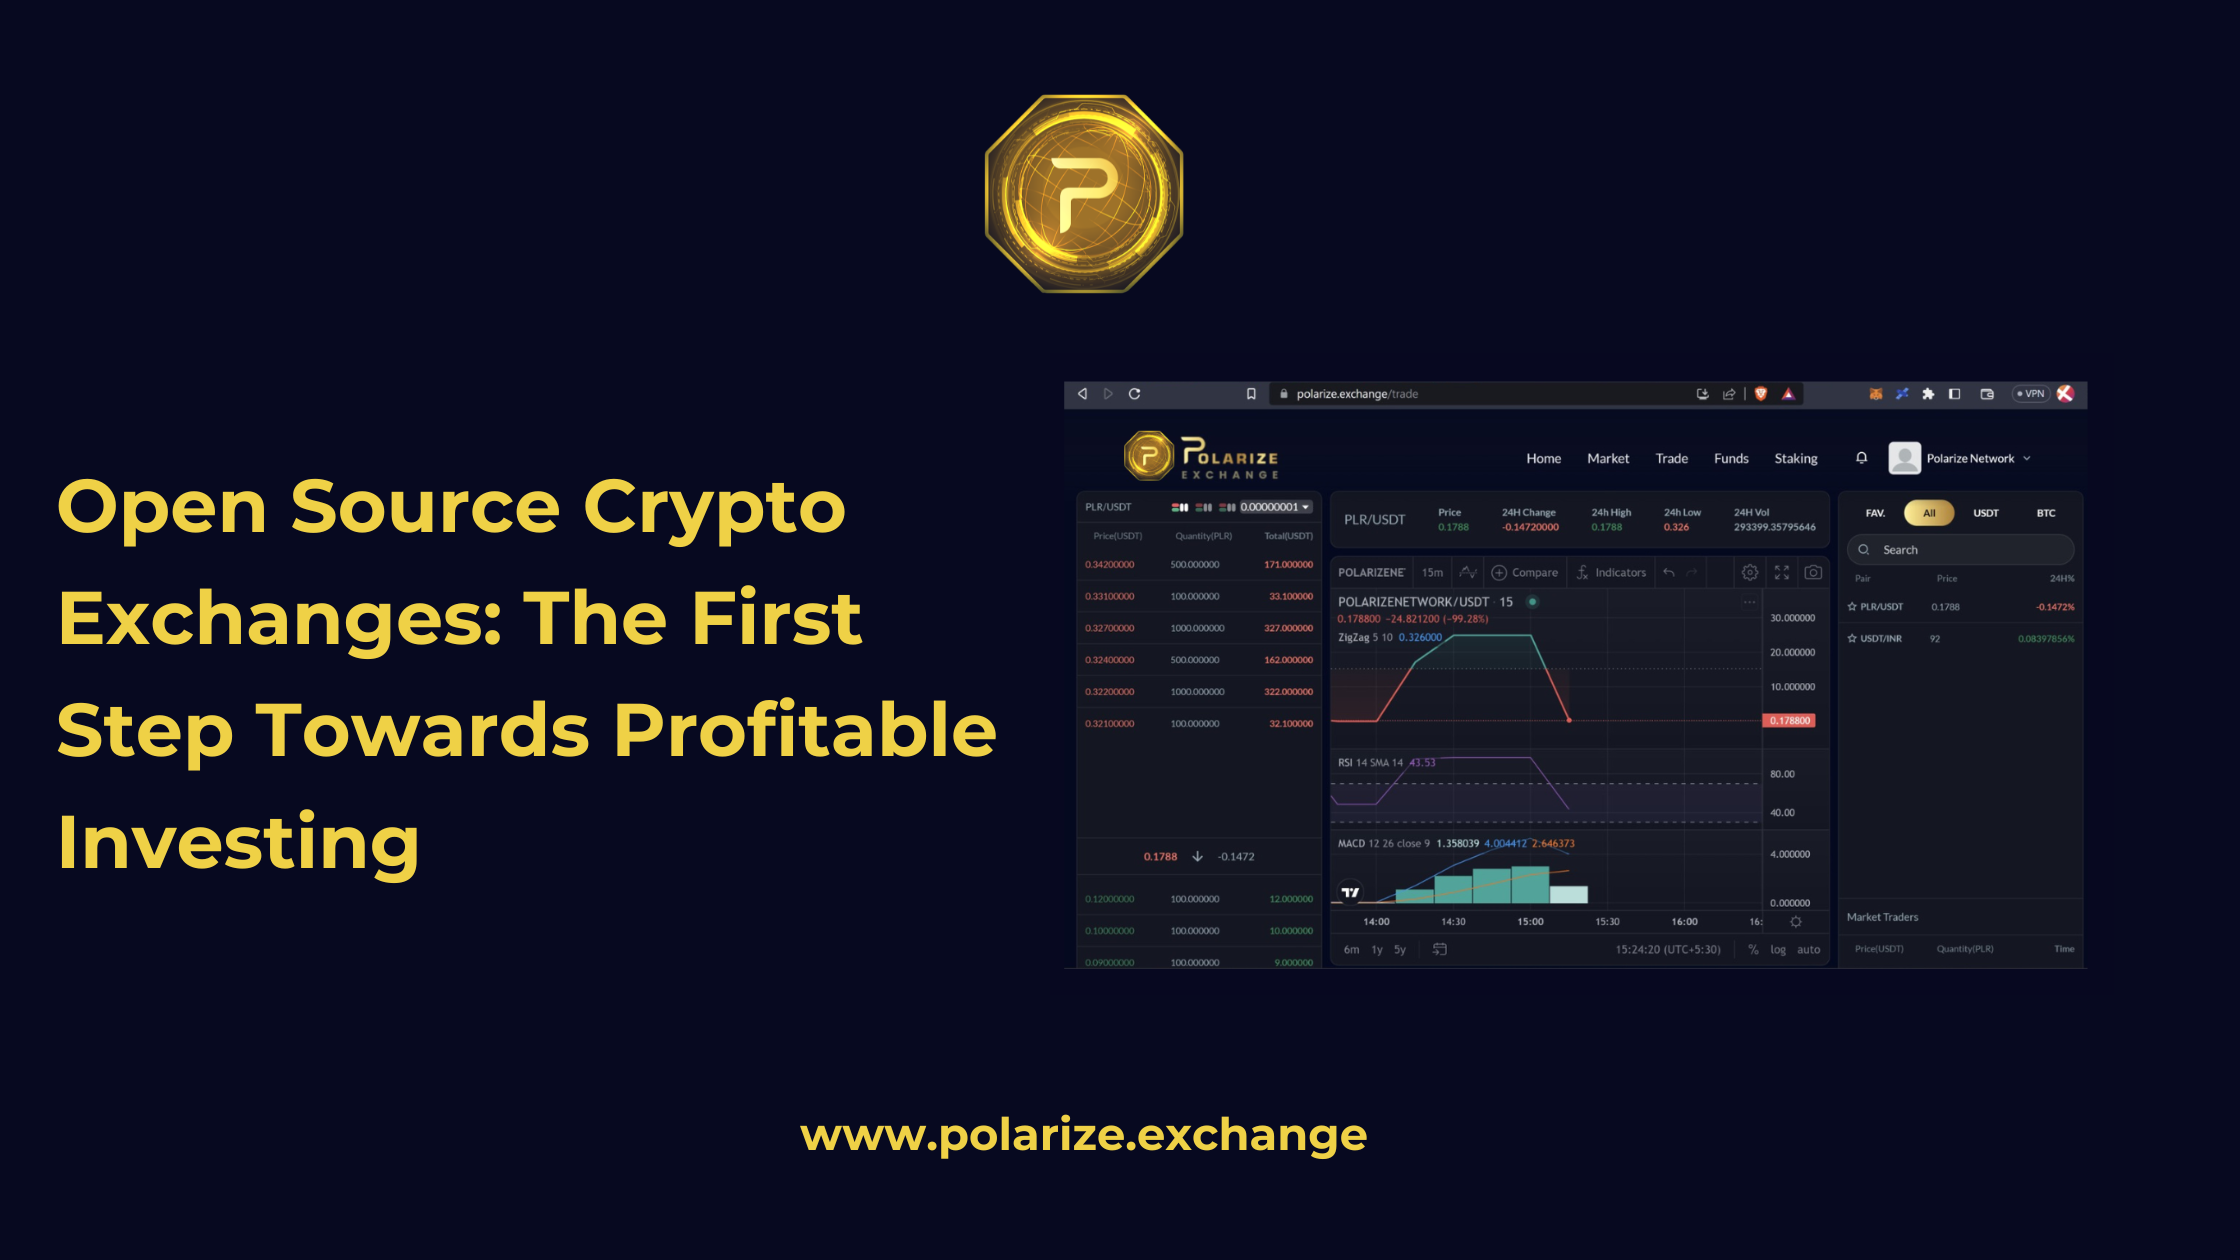 Open Source Crypto Exchanges: The First Step Towards Profitable Investing